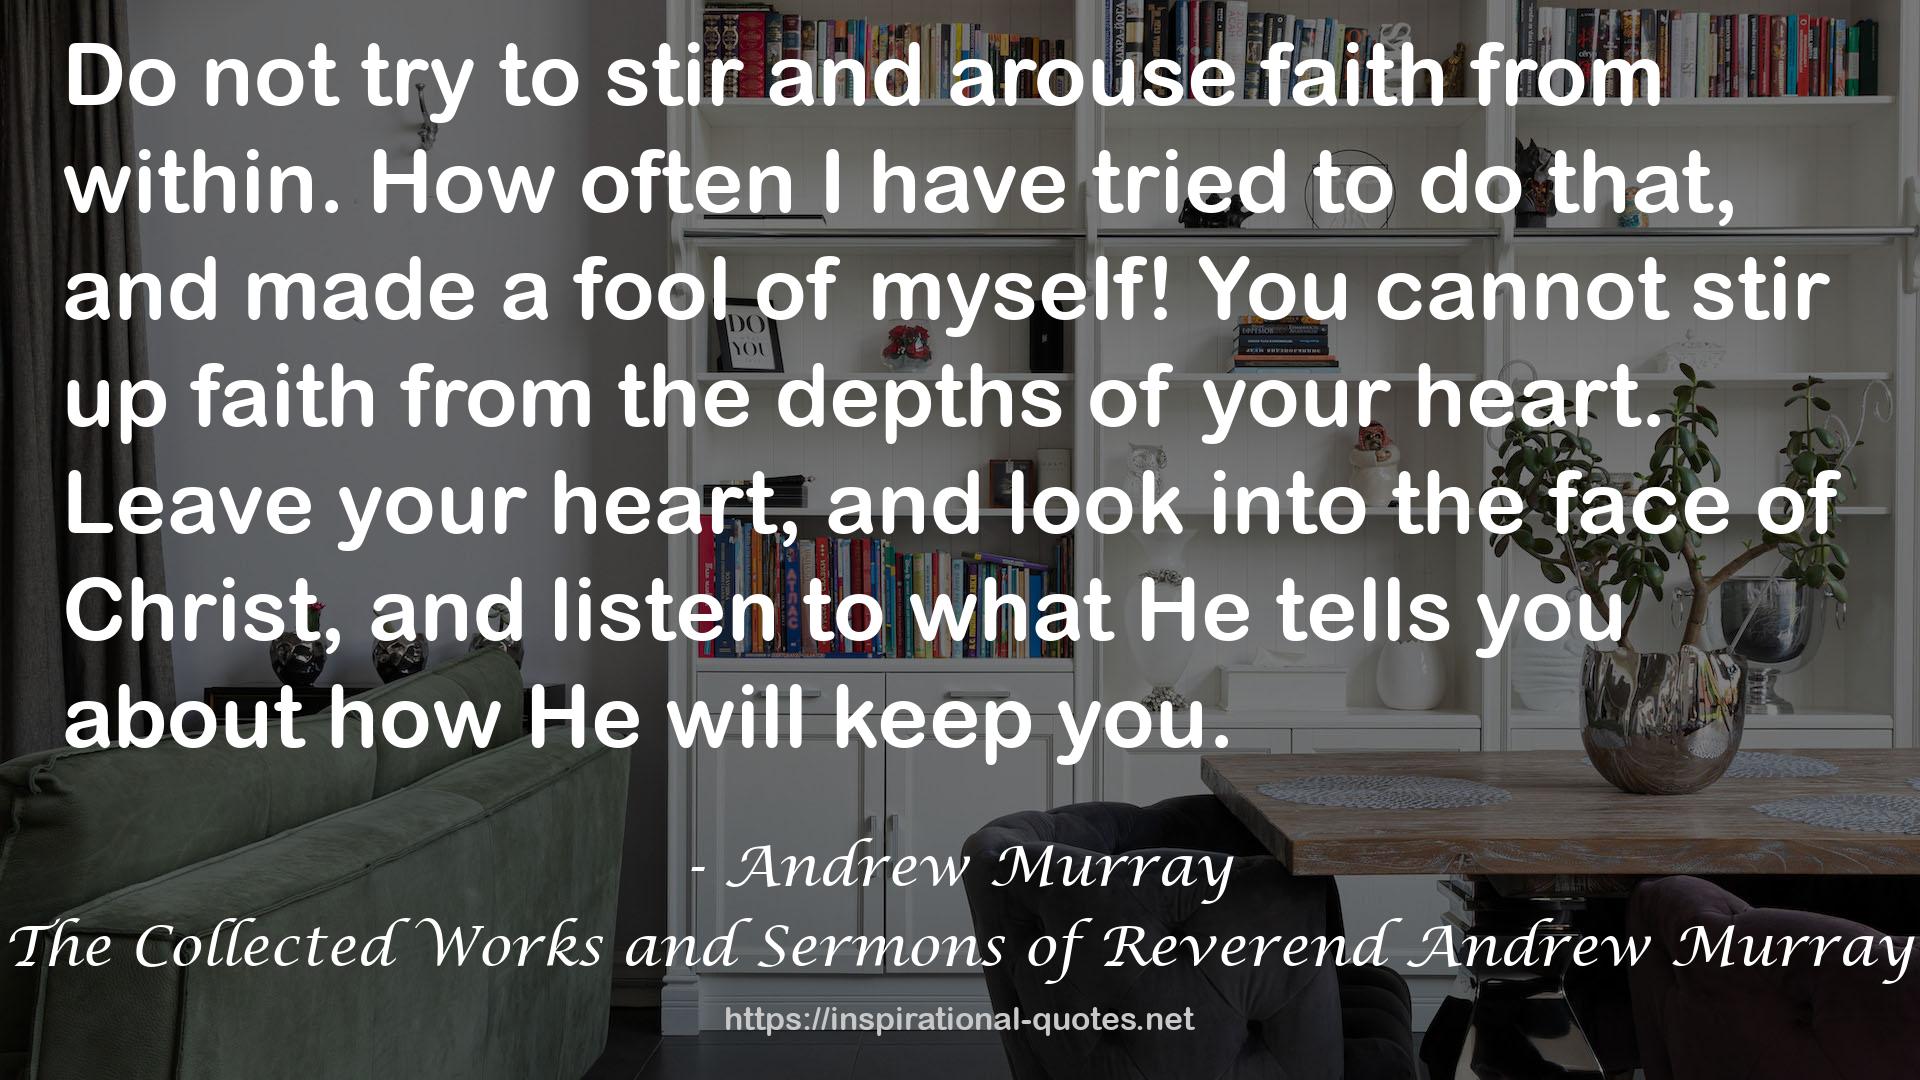 The Collected Works and Sermons of Reverend Andrew Murray QUOTES